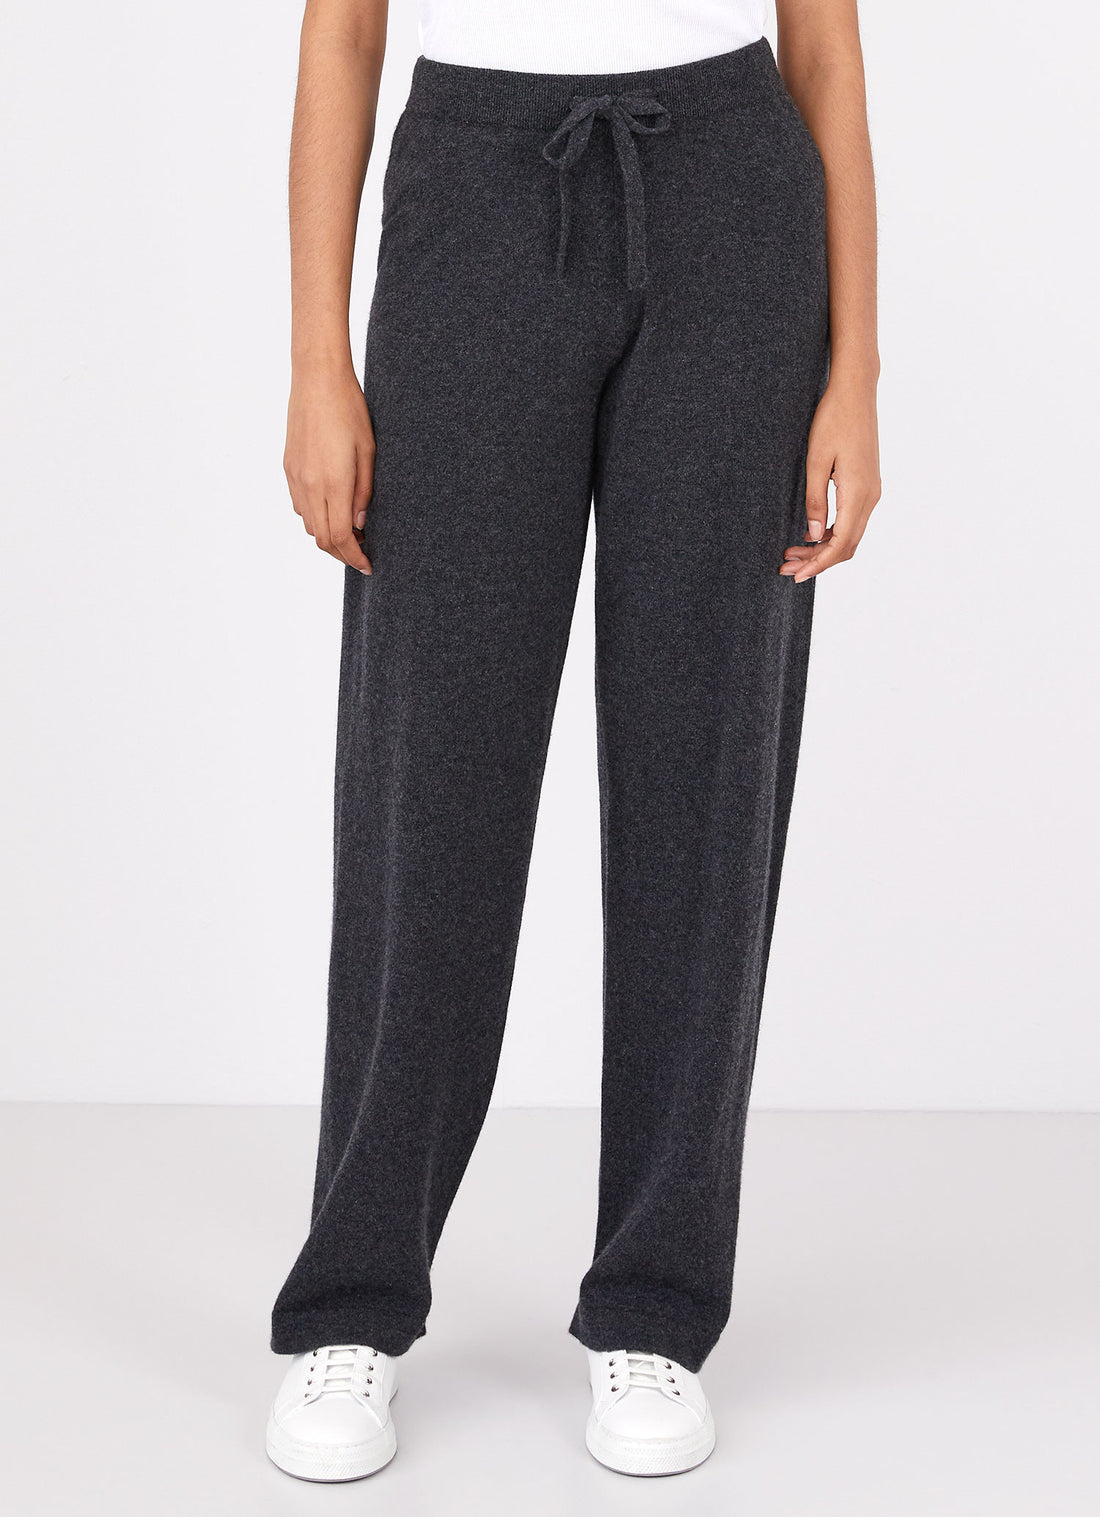 Women's Cashmere Lounge Pant in Charcoal Melange